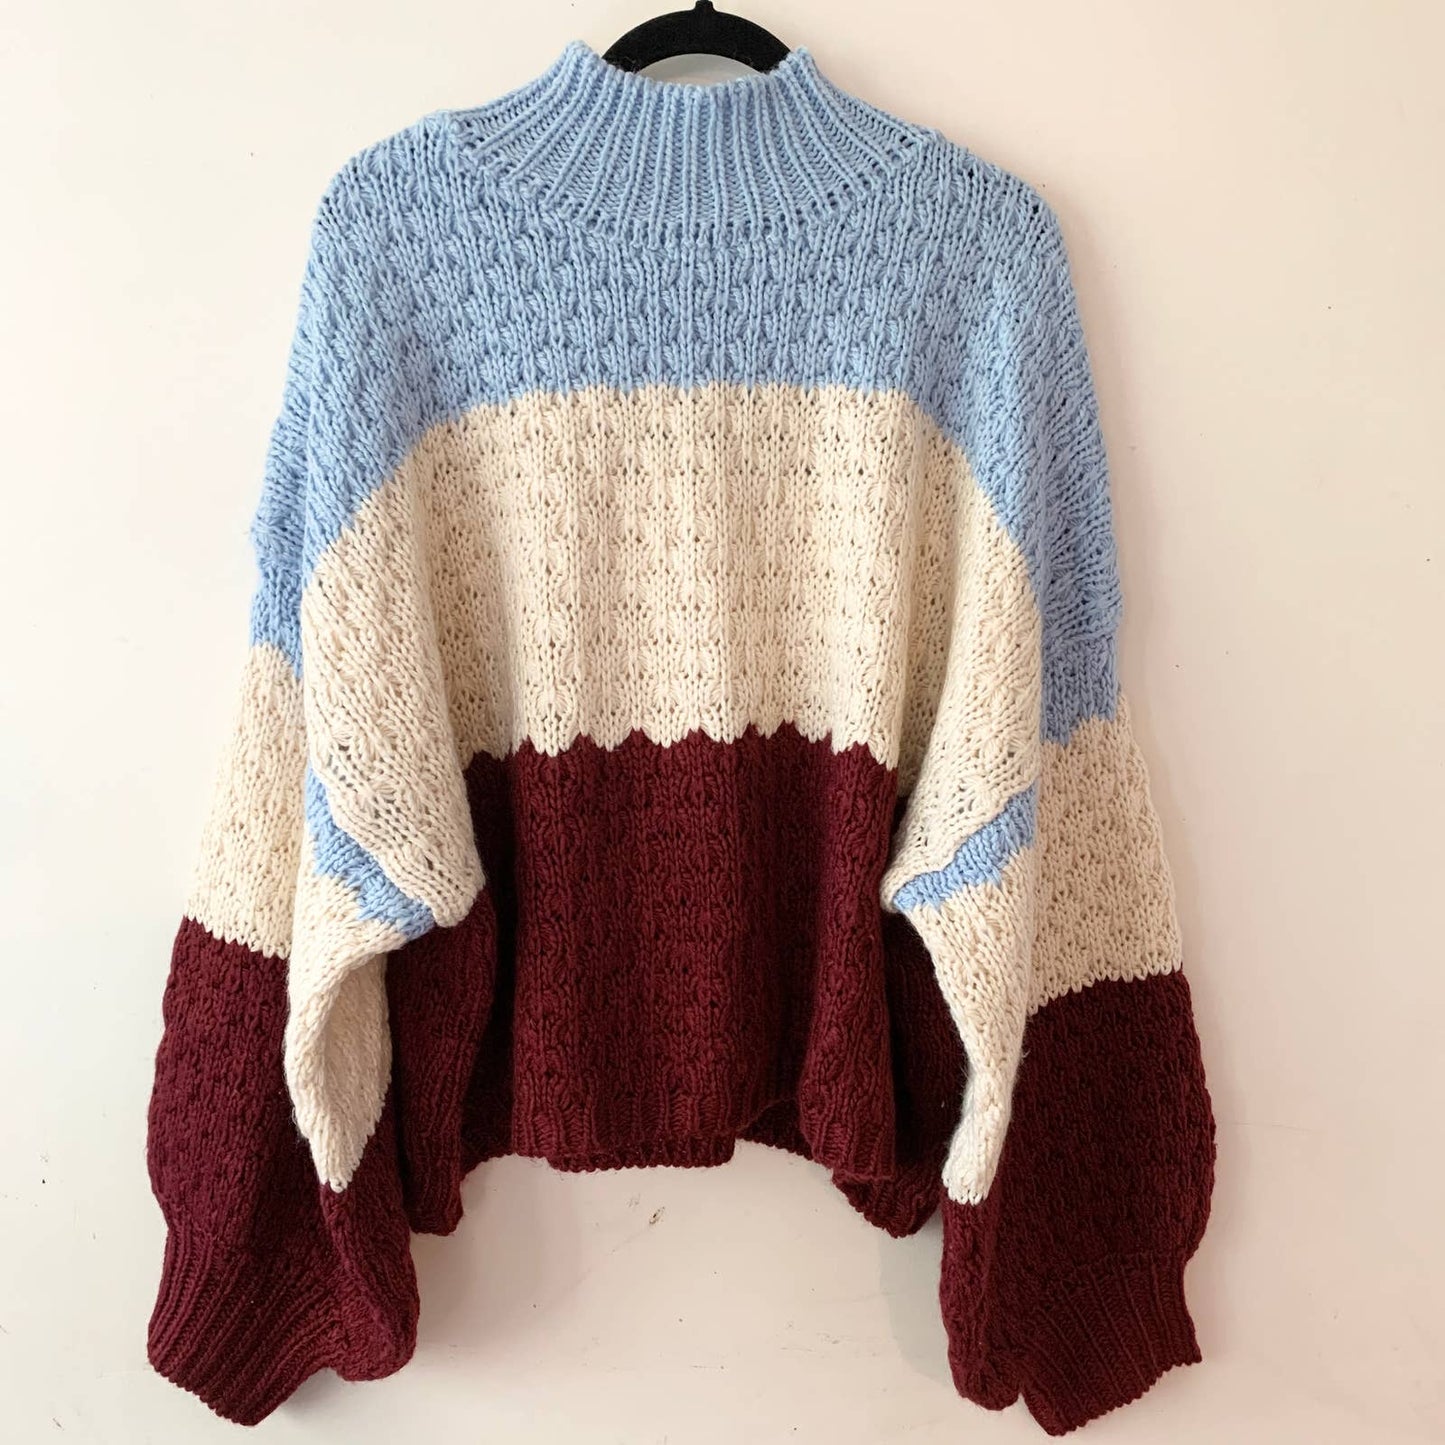 Anthropologie Colorblock Nell Knit Sweater Burgundy Blue White 2X